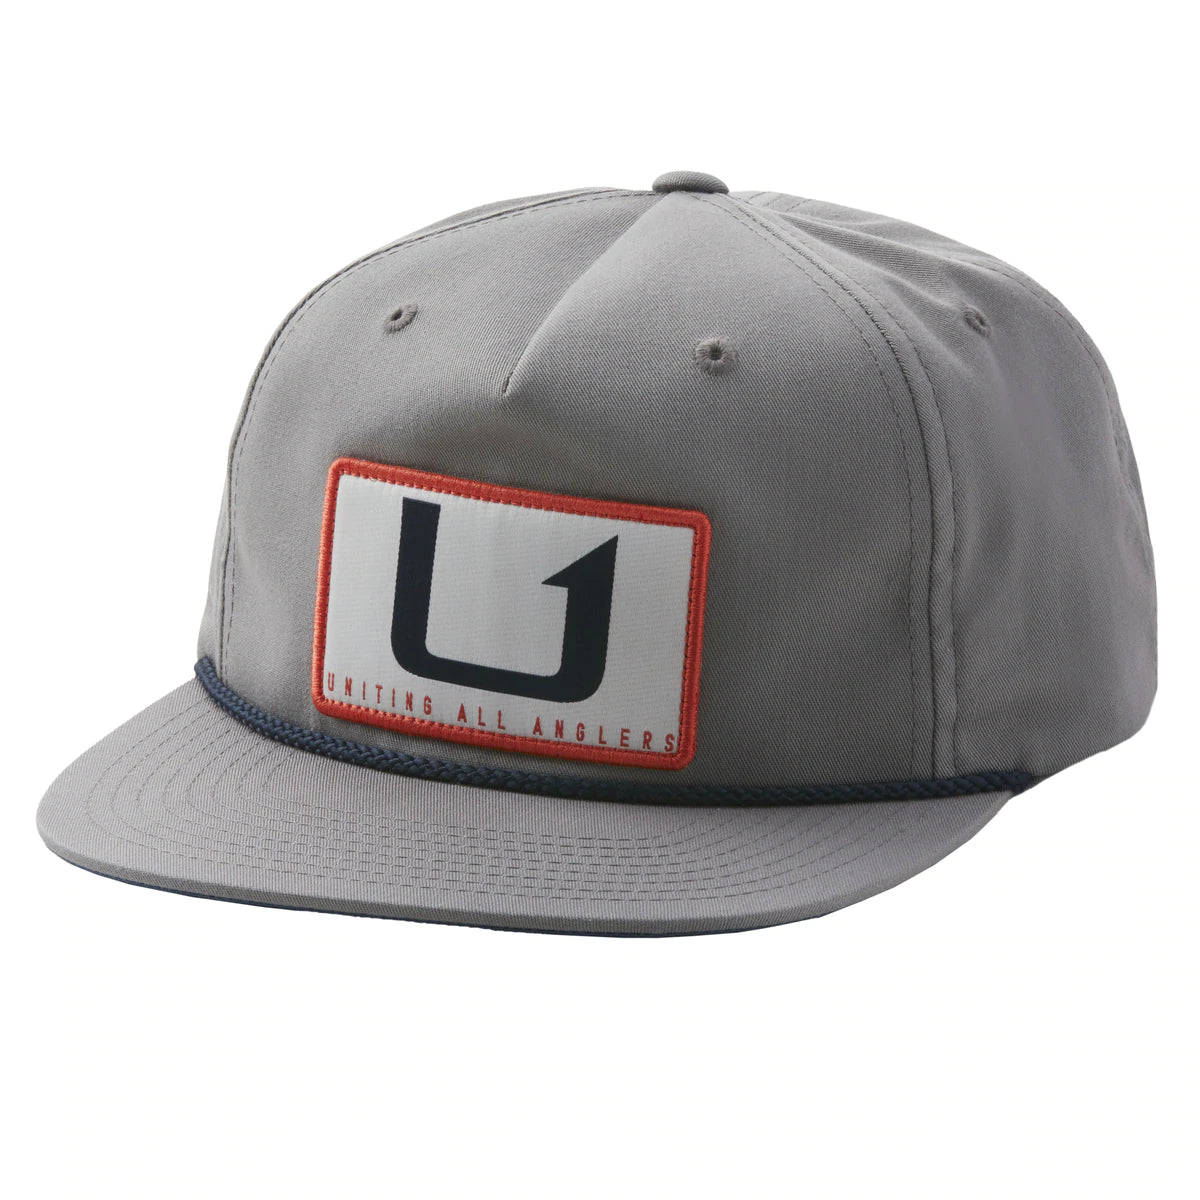 Huk United Unstructured Hat- Overcast Grey